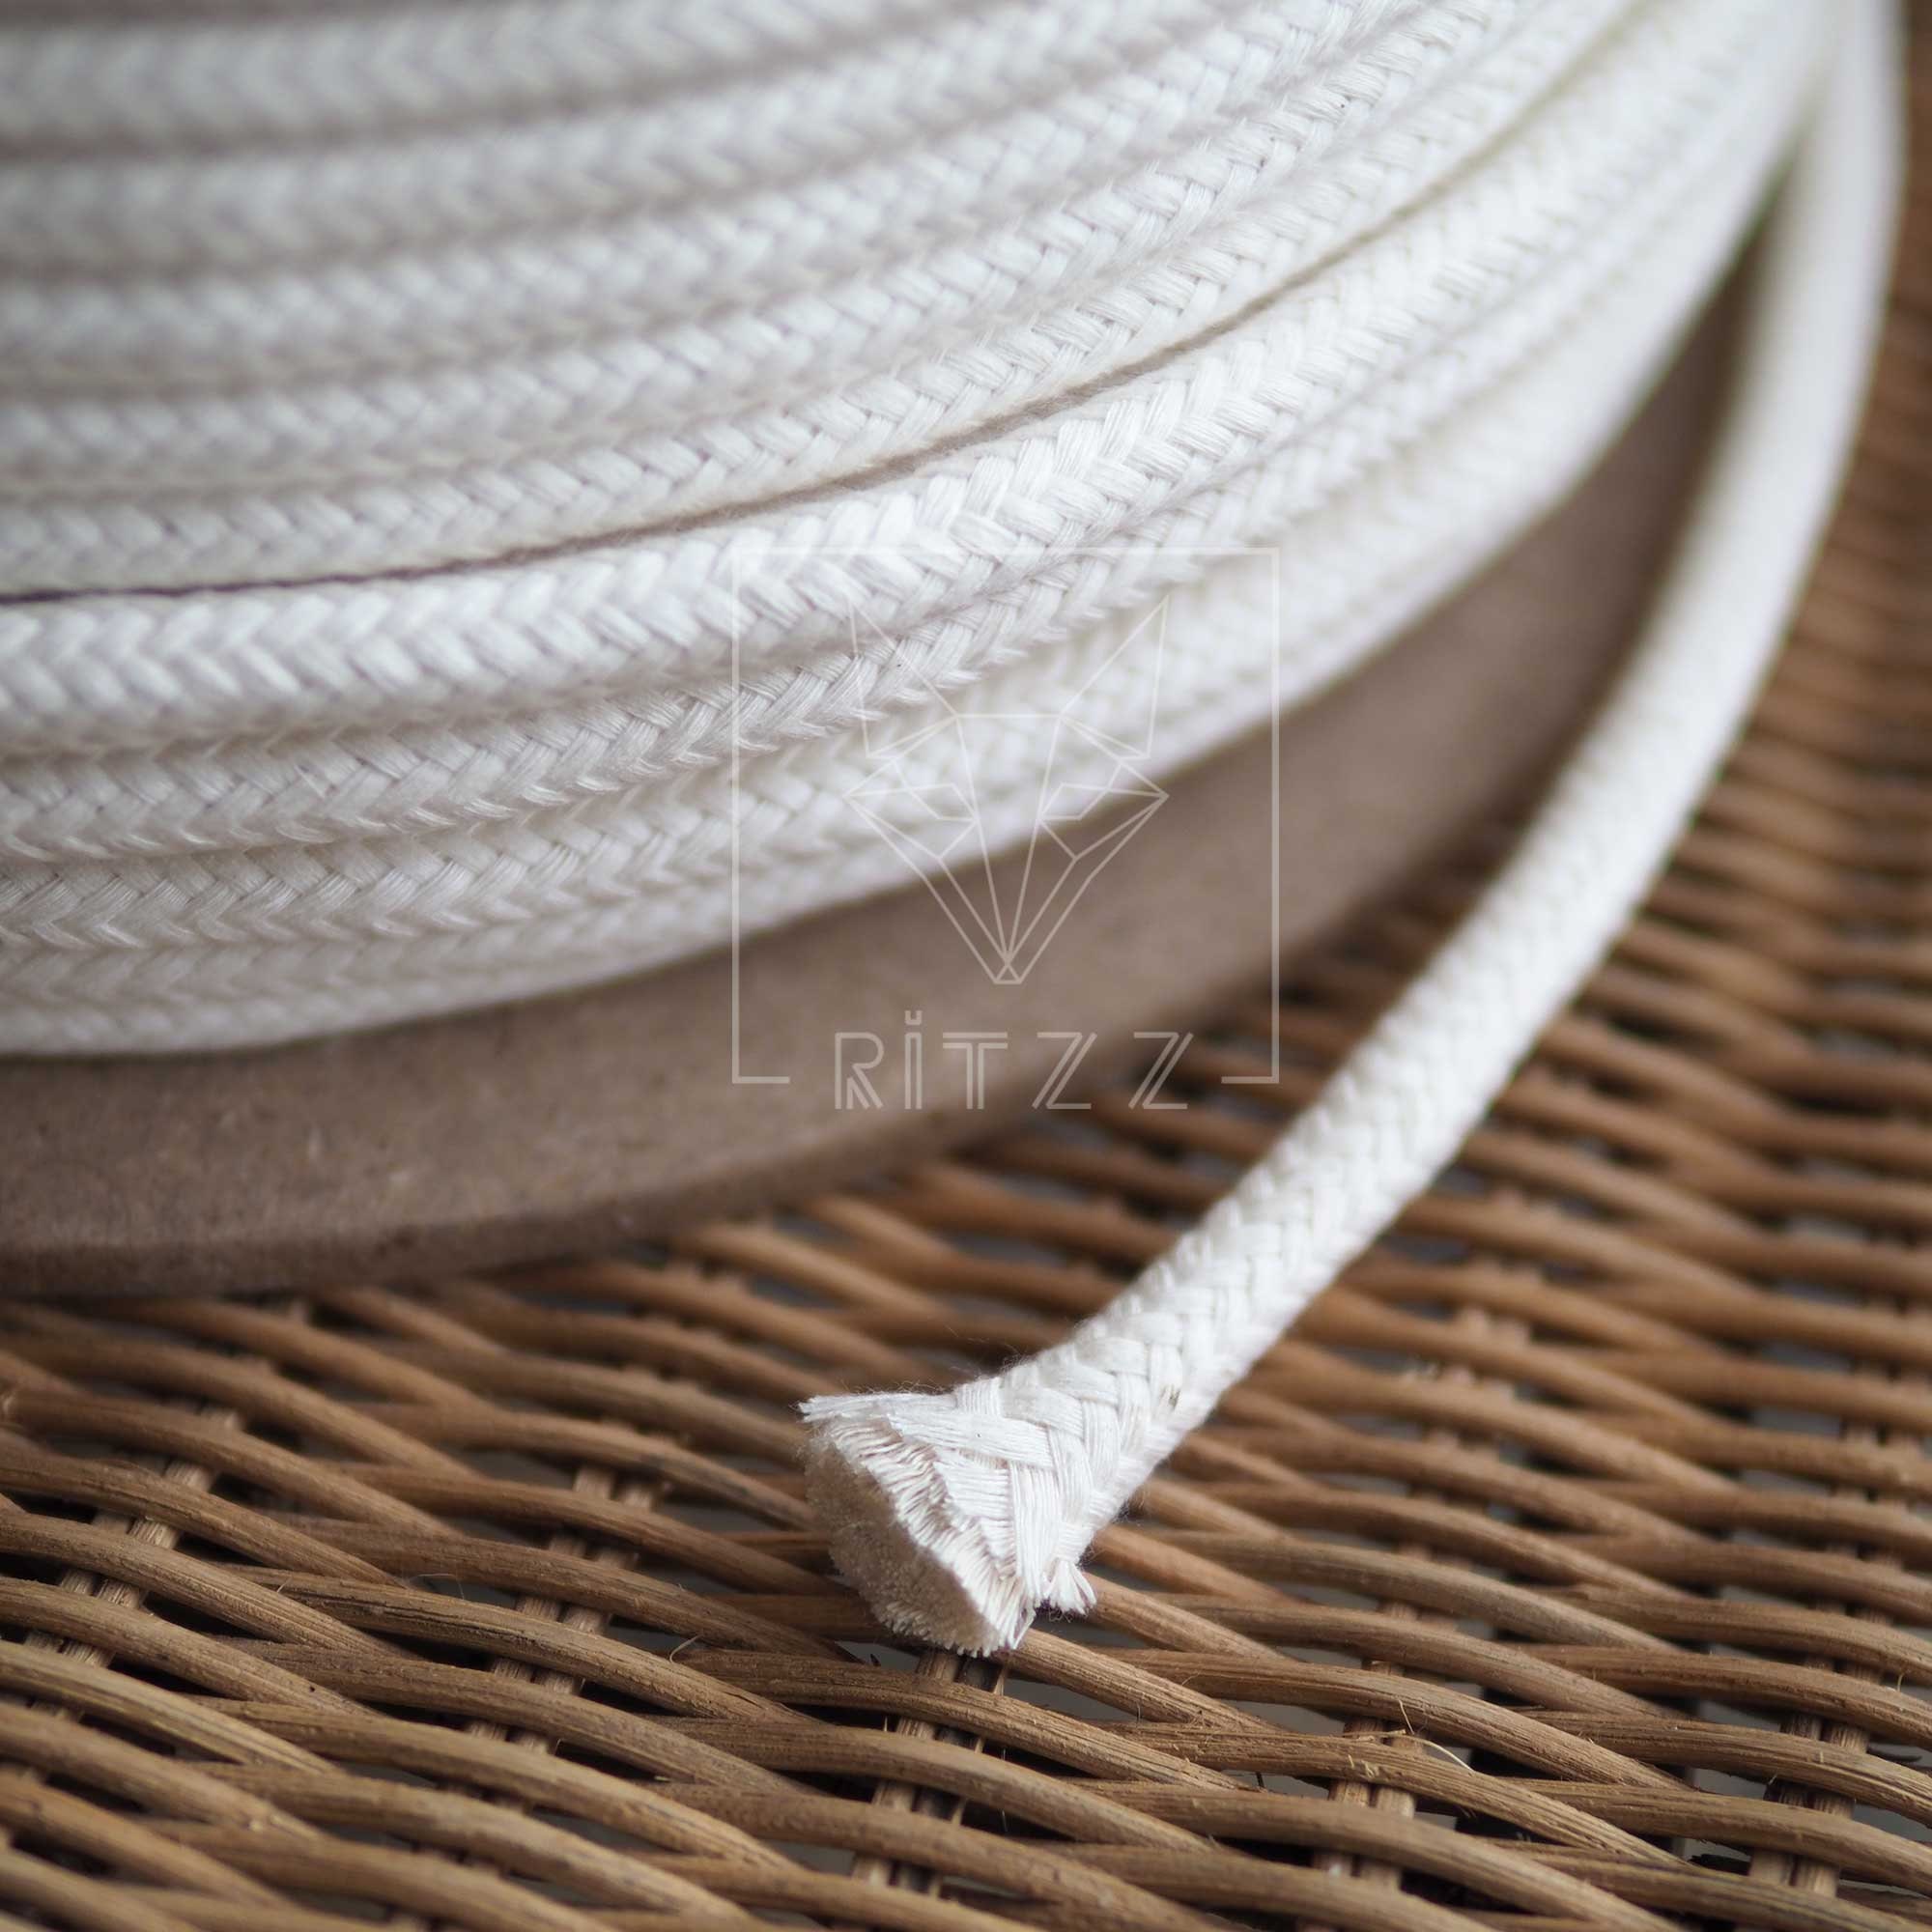 Cotton Rope 12mm 